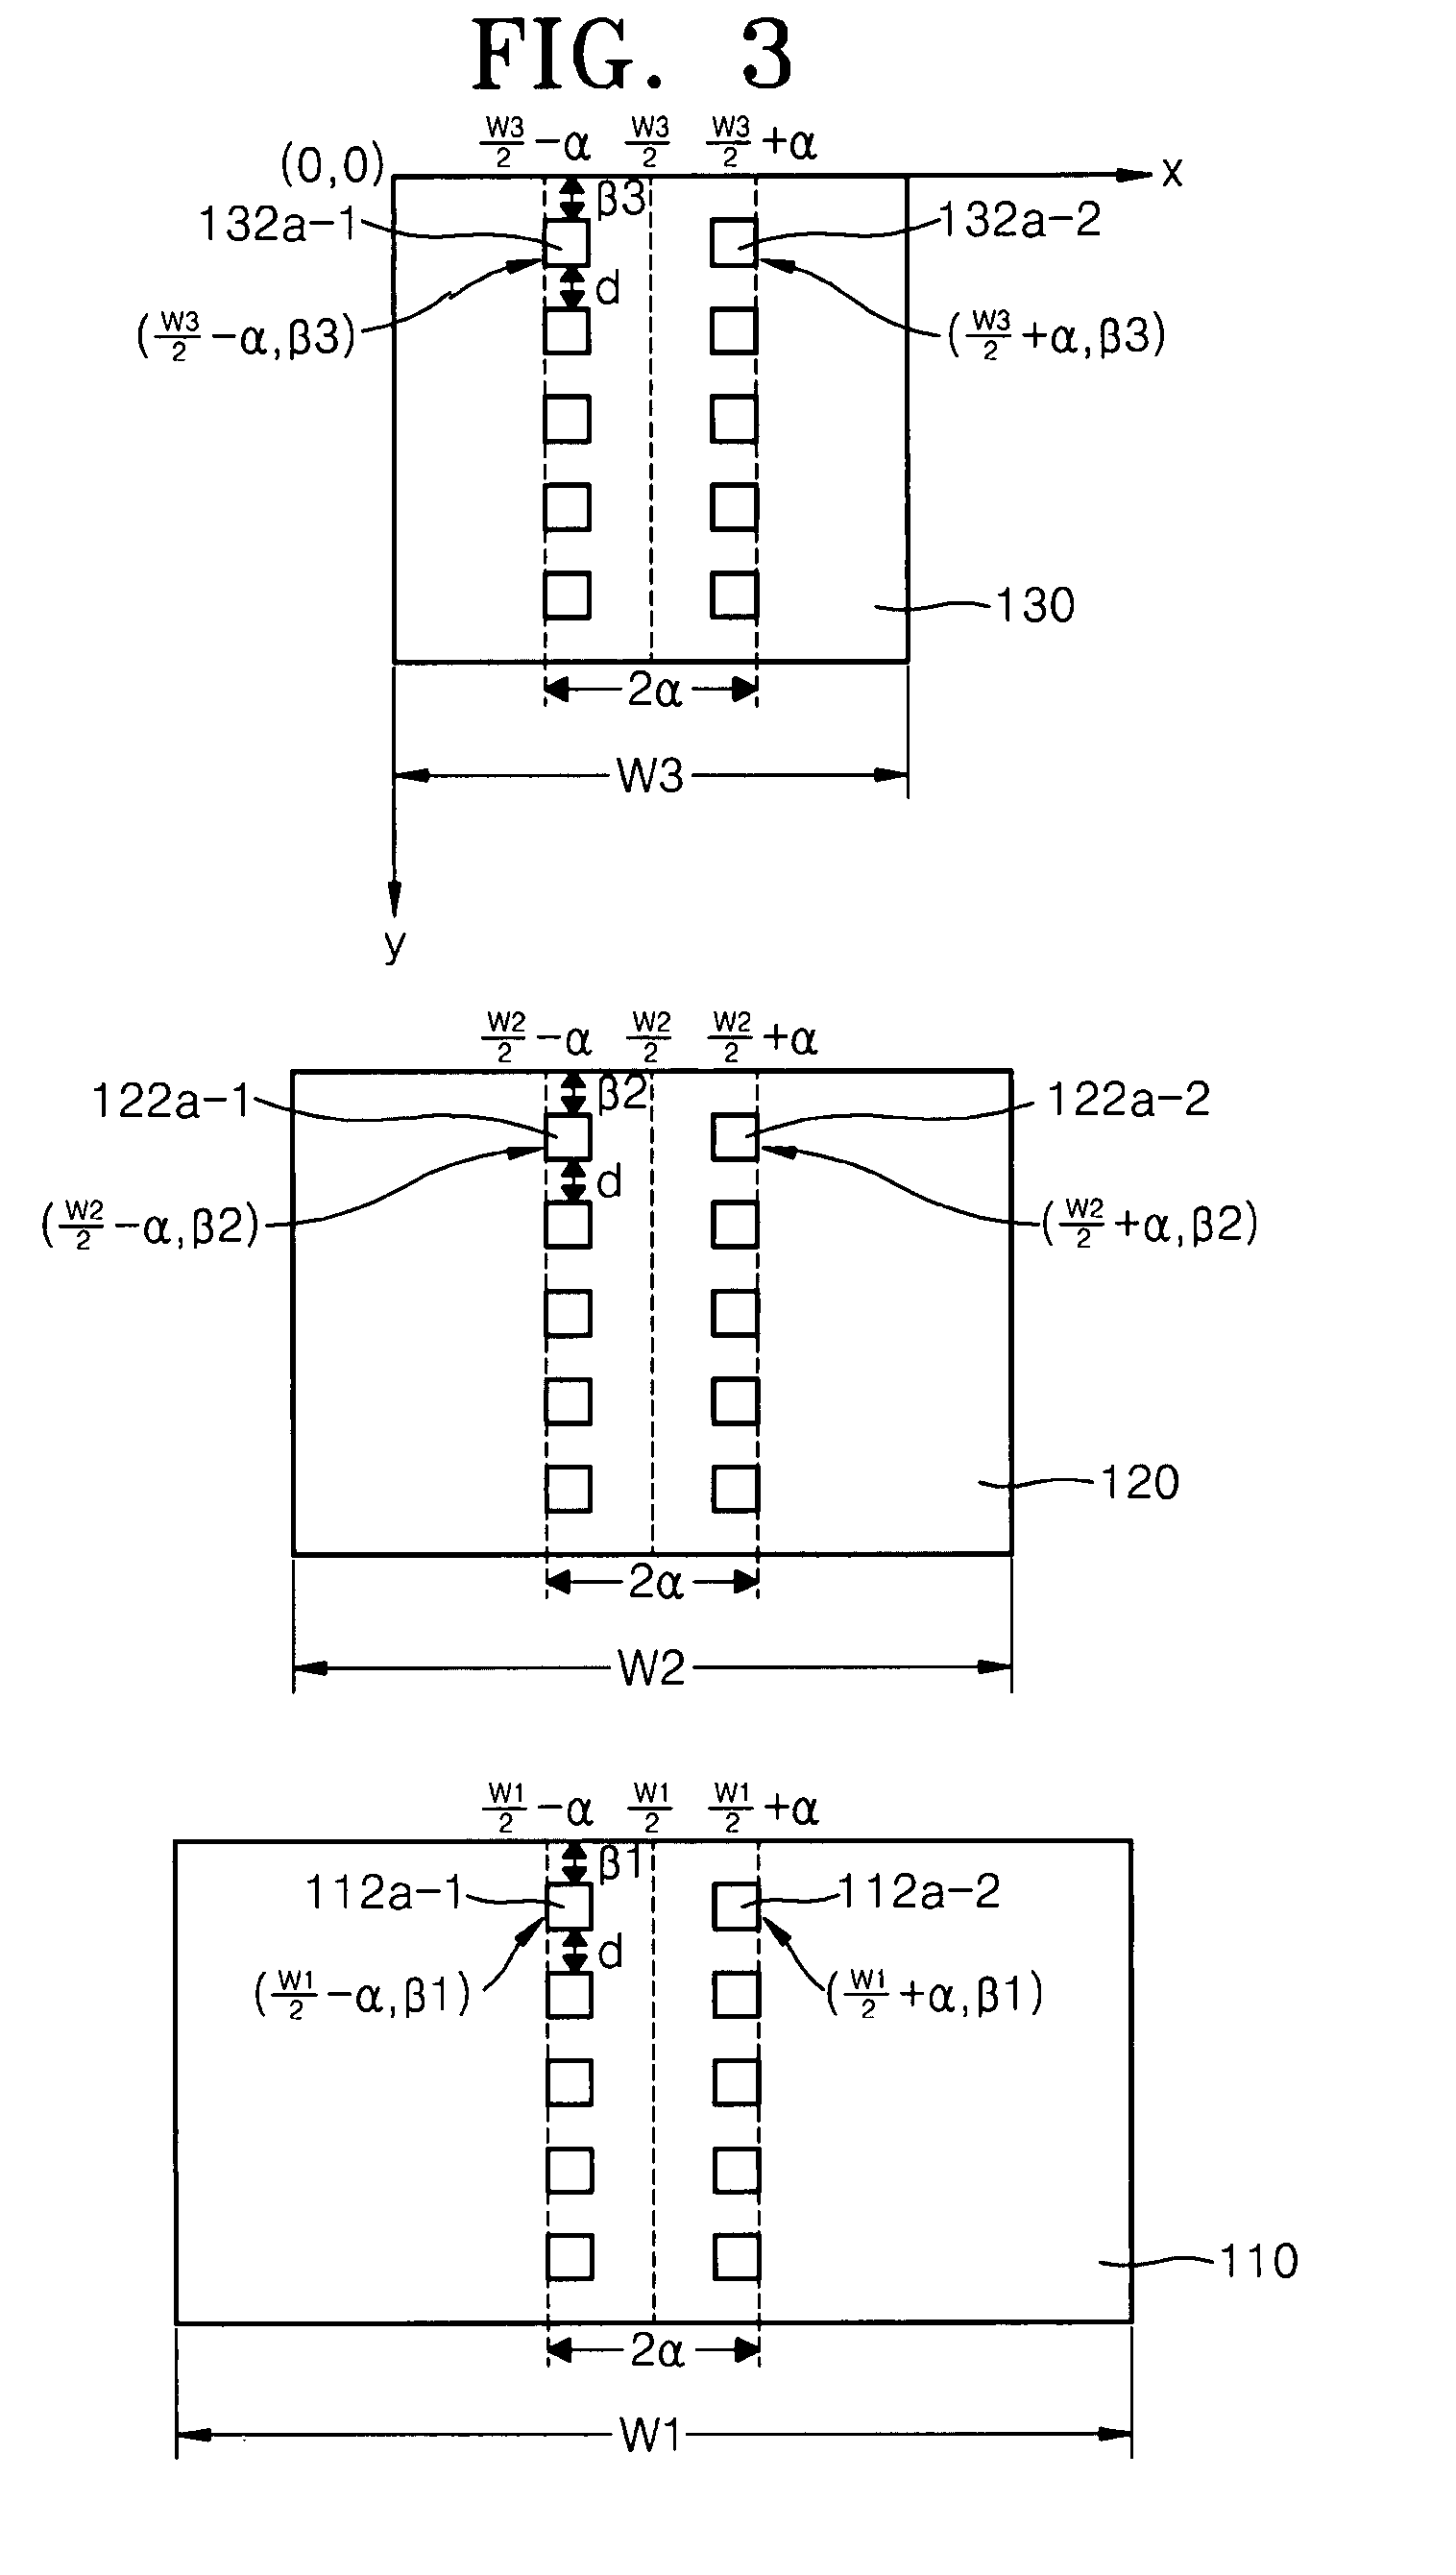 Multi-chip package having a stacked plurality of different sized semiconductor chips, and method of manufacturing the same